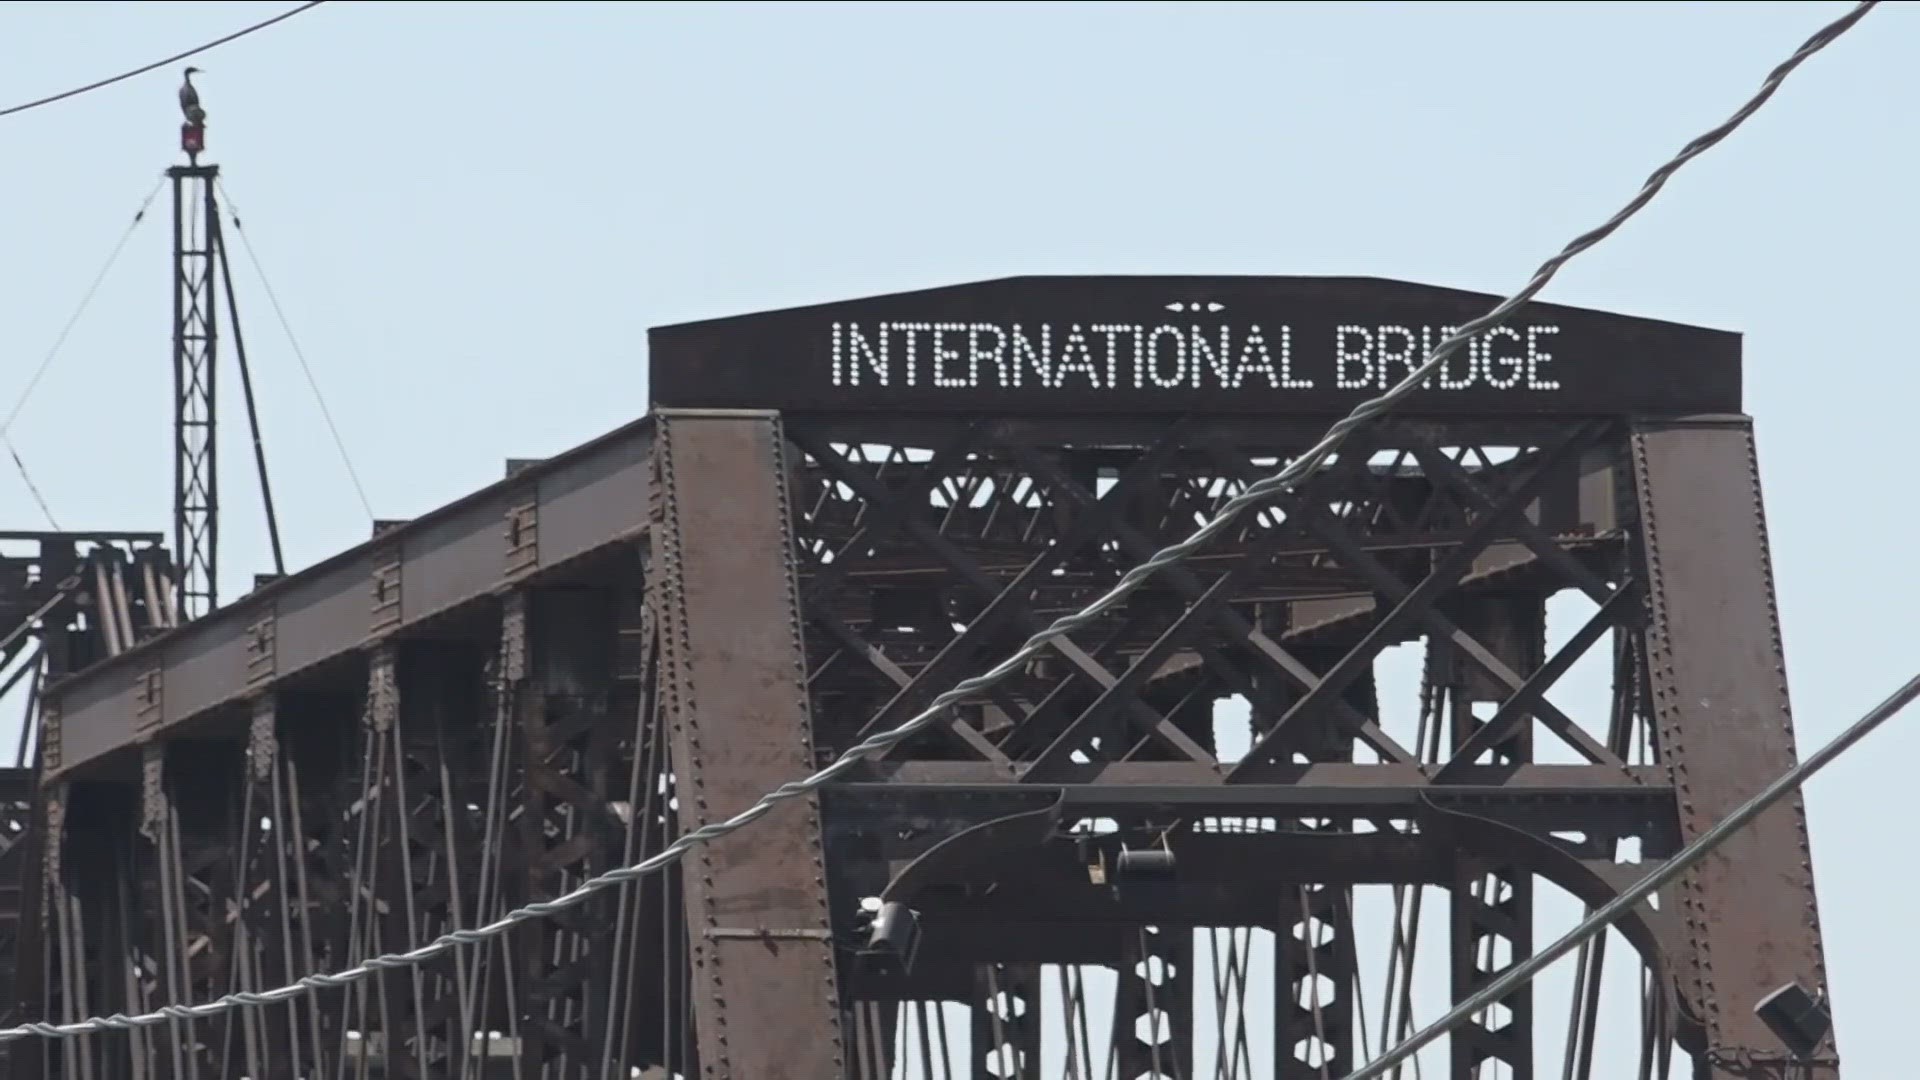 U.S. Border Patrol agents at the Buffalo location on Tuesday night saw 4 people allegedly jump off a moving freight train on the International Railroad Bridge.